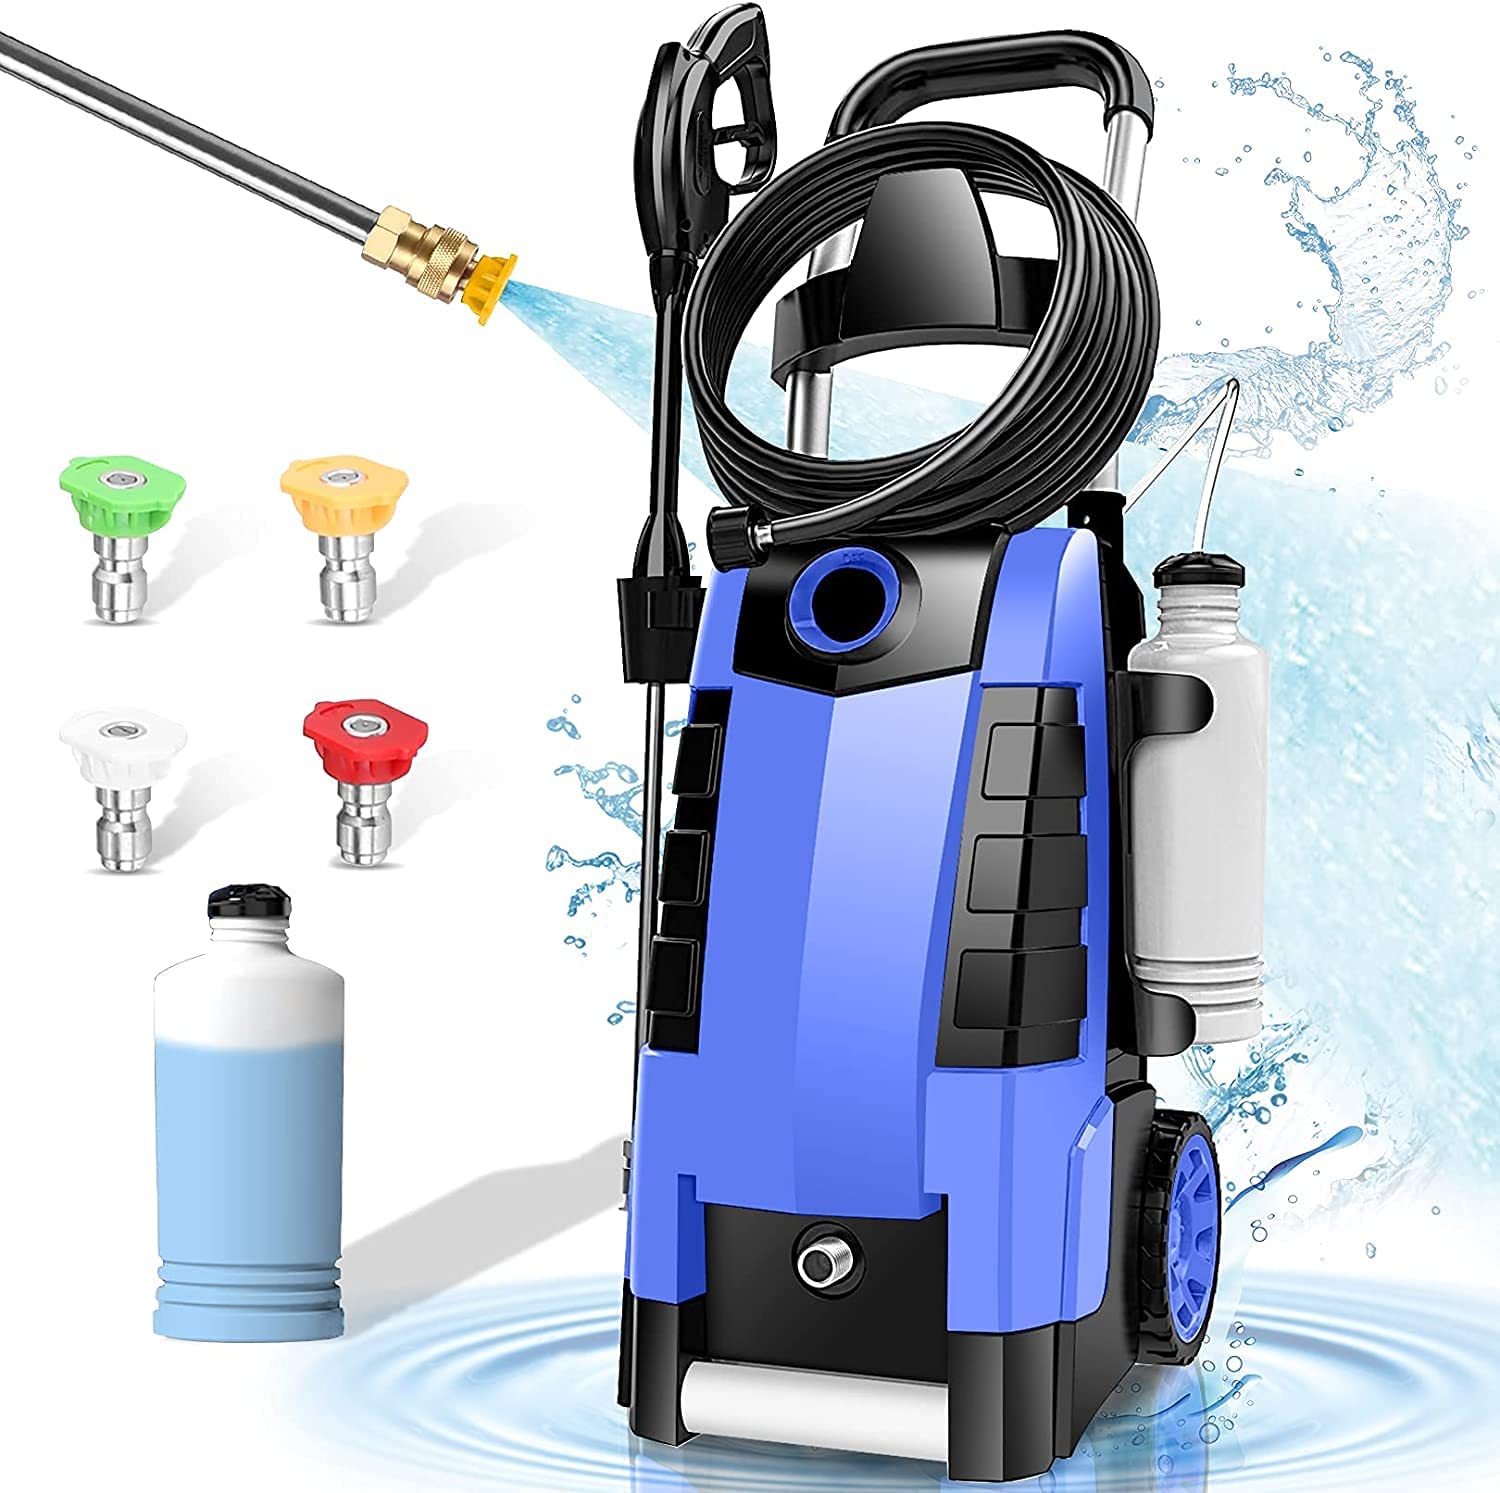 How do you do the High-pressure cleaning process